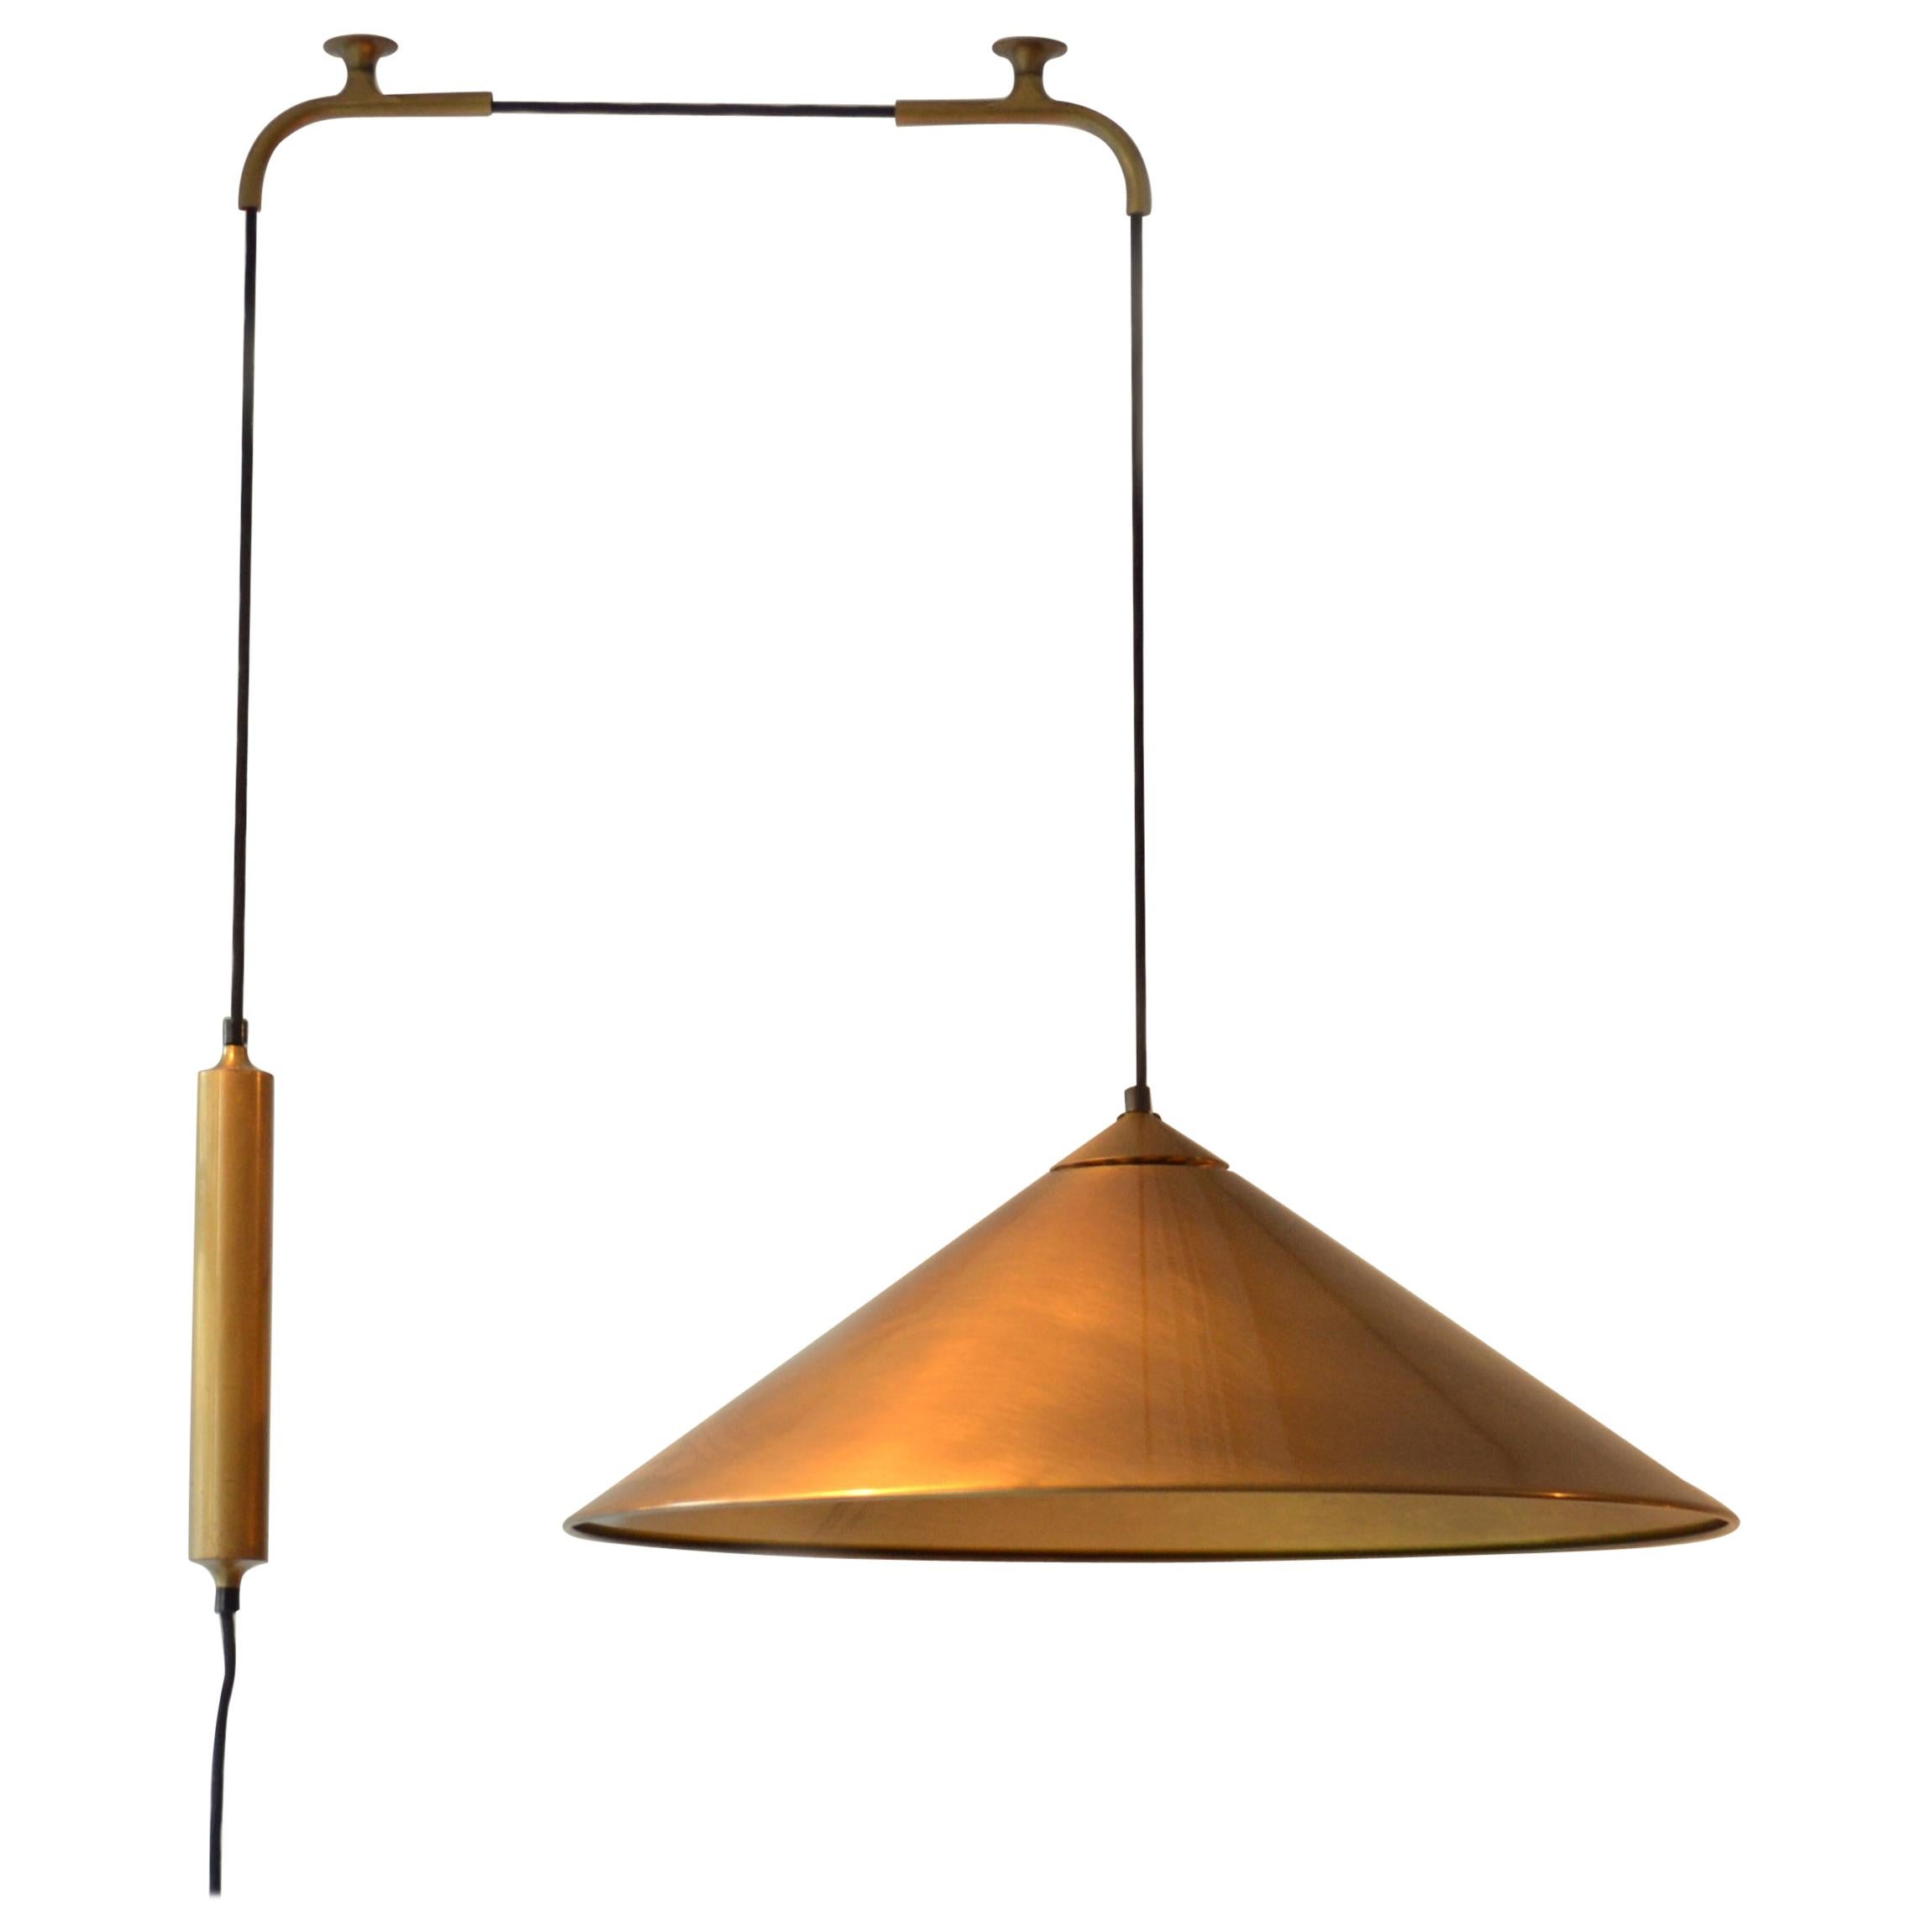 Counterbalance Brass Pendant 'Keos' Elongated Side Weight by Florian Schulz